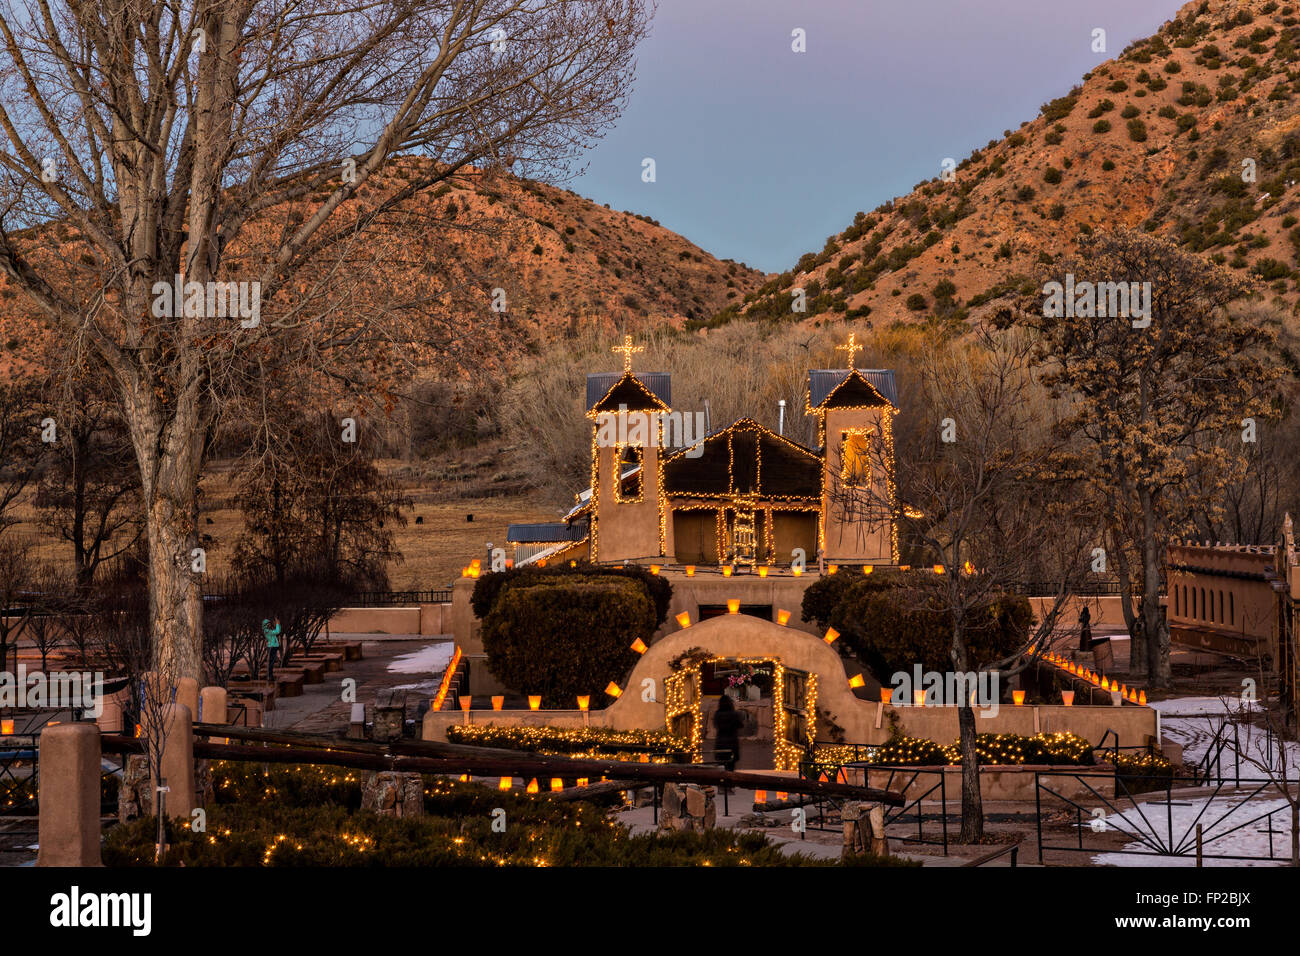 El Santuario de Chimayo Historic Site illuminated by hundreds of small paper lanterns known as luminaria to celebrate the holiday season December 13, 2015 in Jemez Springs, New Mexico. Each year 30,000 people make pilgrimages to the shrine. Stock Photo